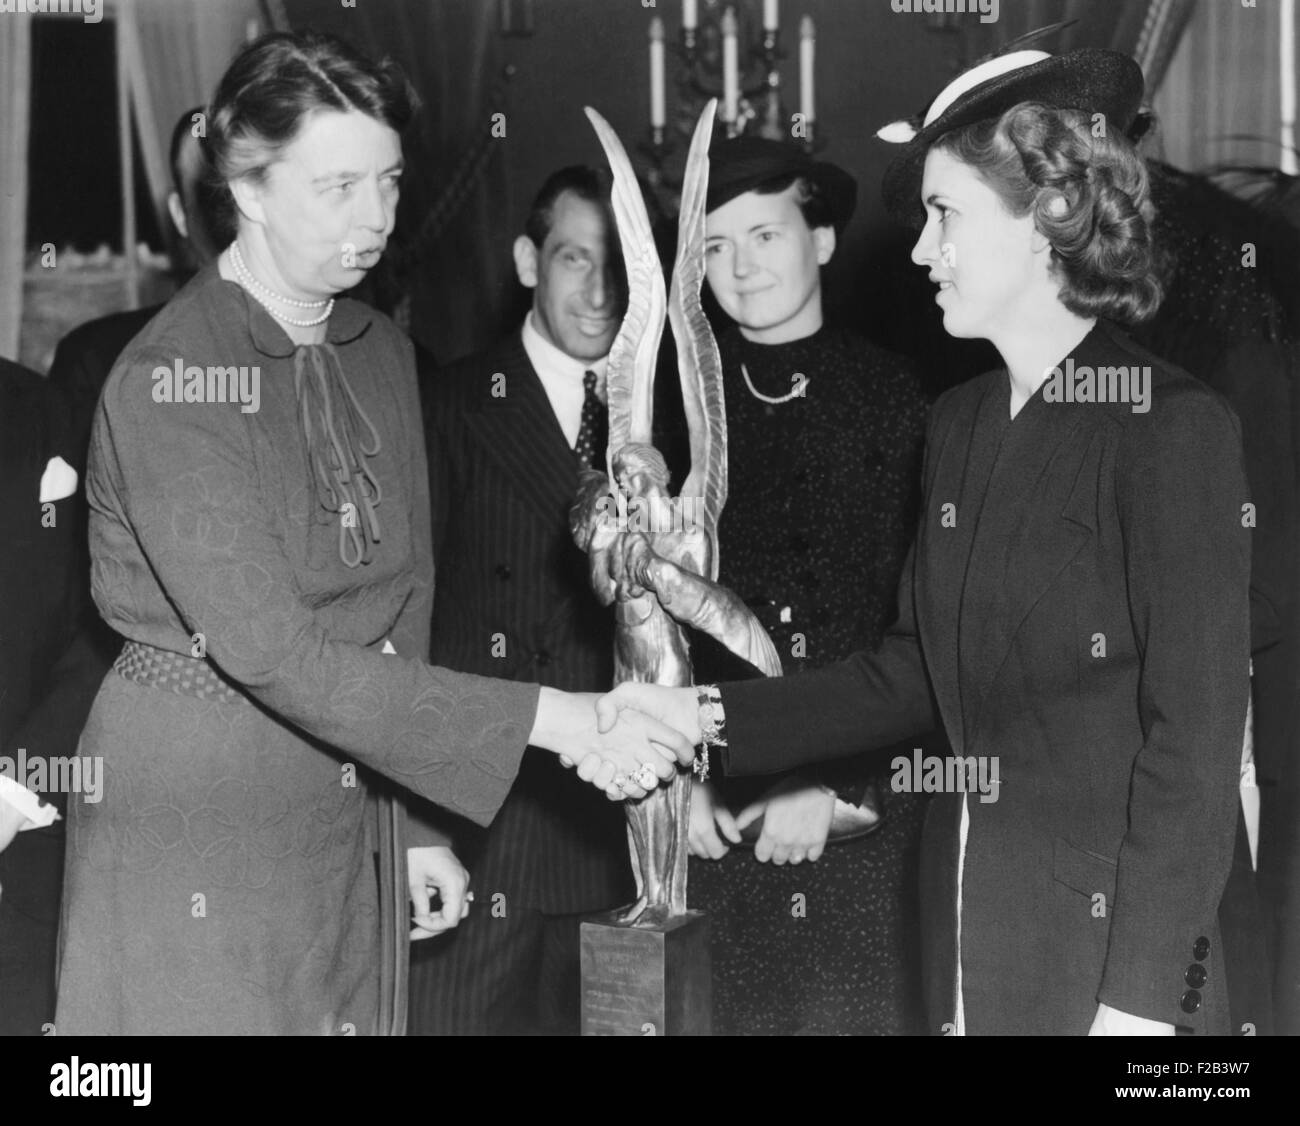 Jacqueline Cochran receives Aviation award. Mrs. Franklin Roosevelt presented to Jacqueline Cochran (right) the trophy of the International League of Aviators and Aviatrix for 1937. April 4, 1937 - (CSU 2015 5 36) Stock Photo